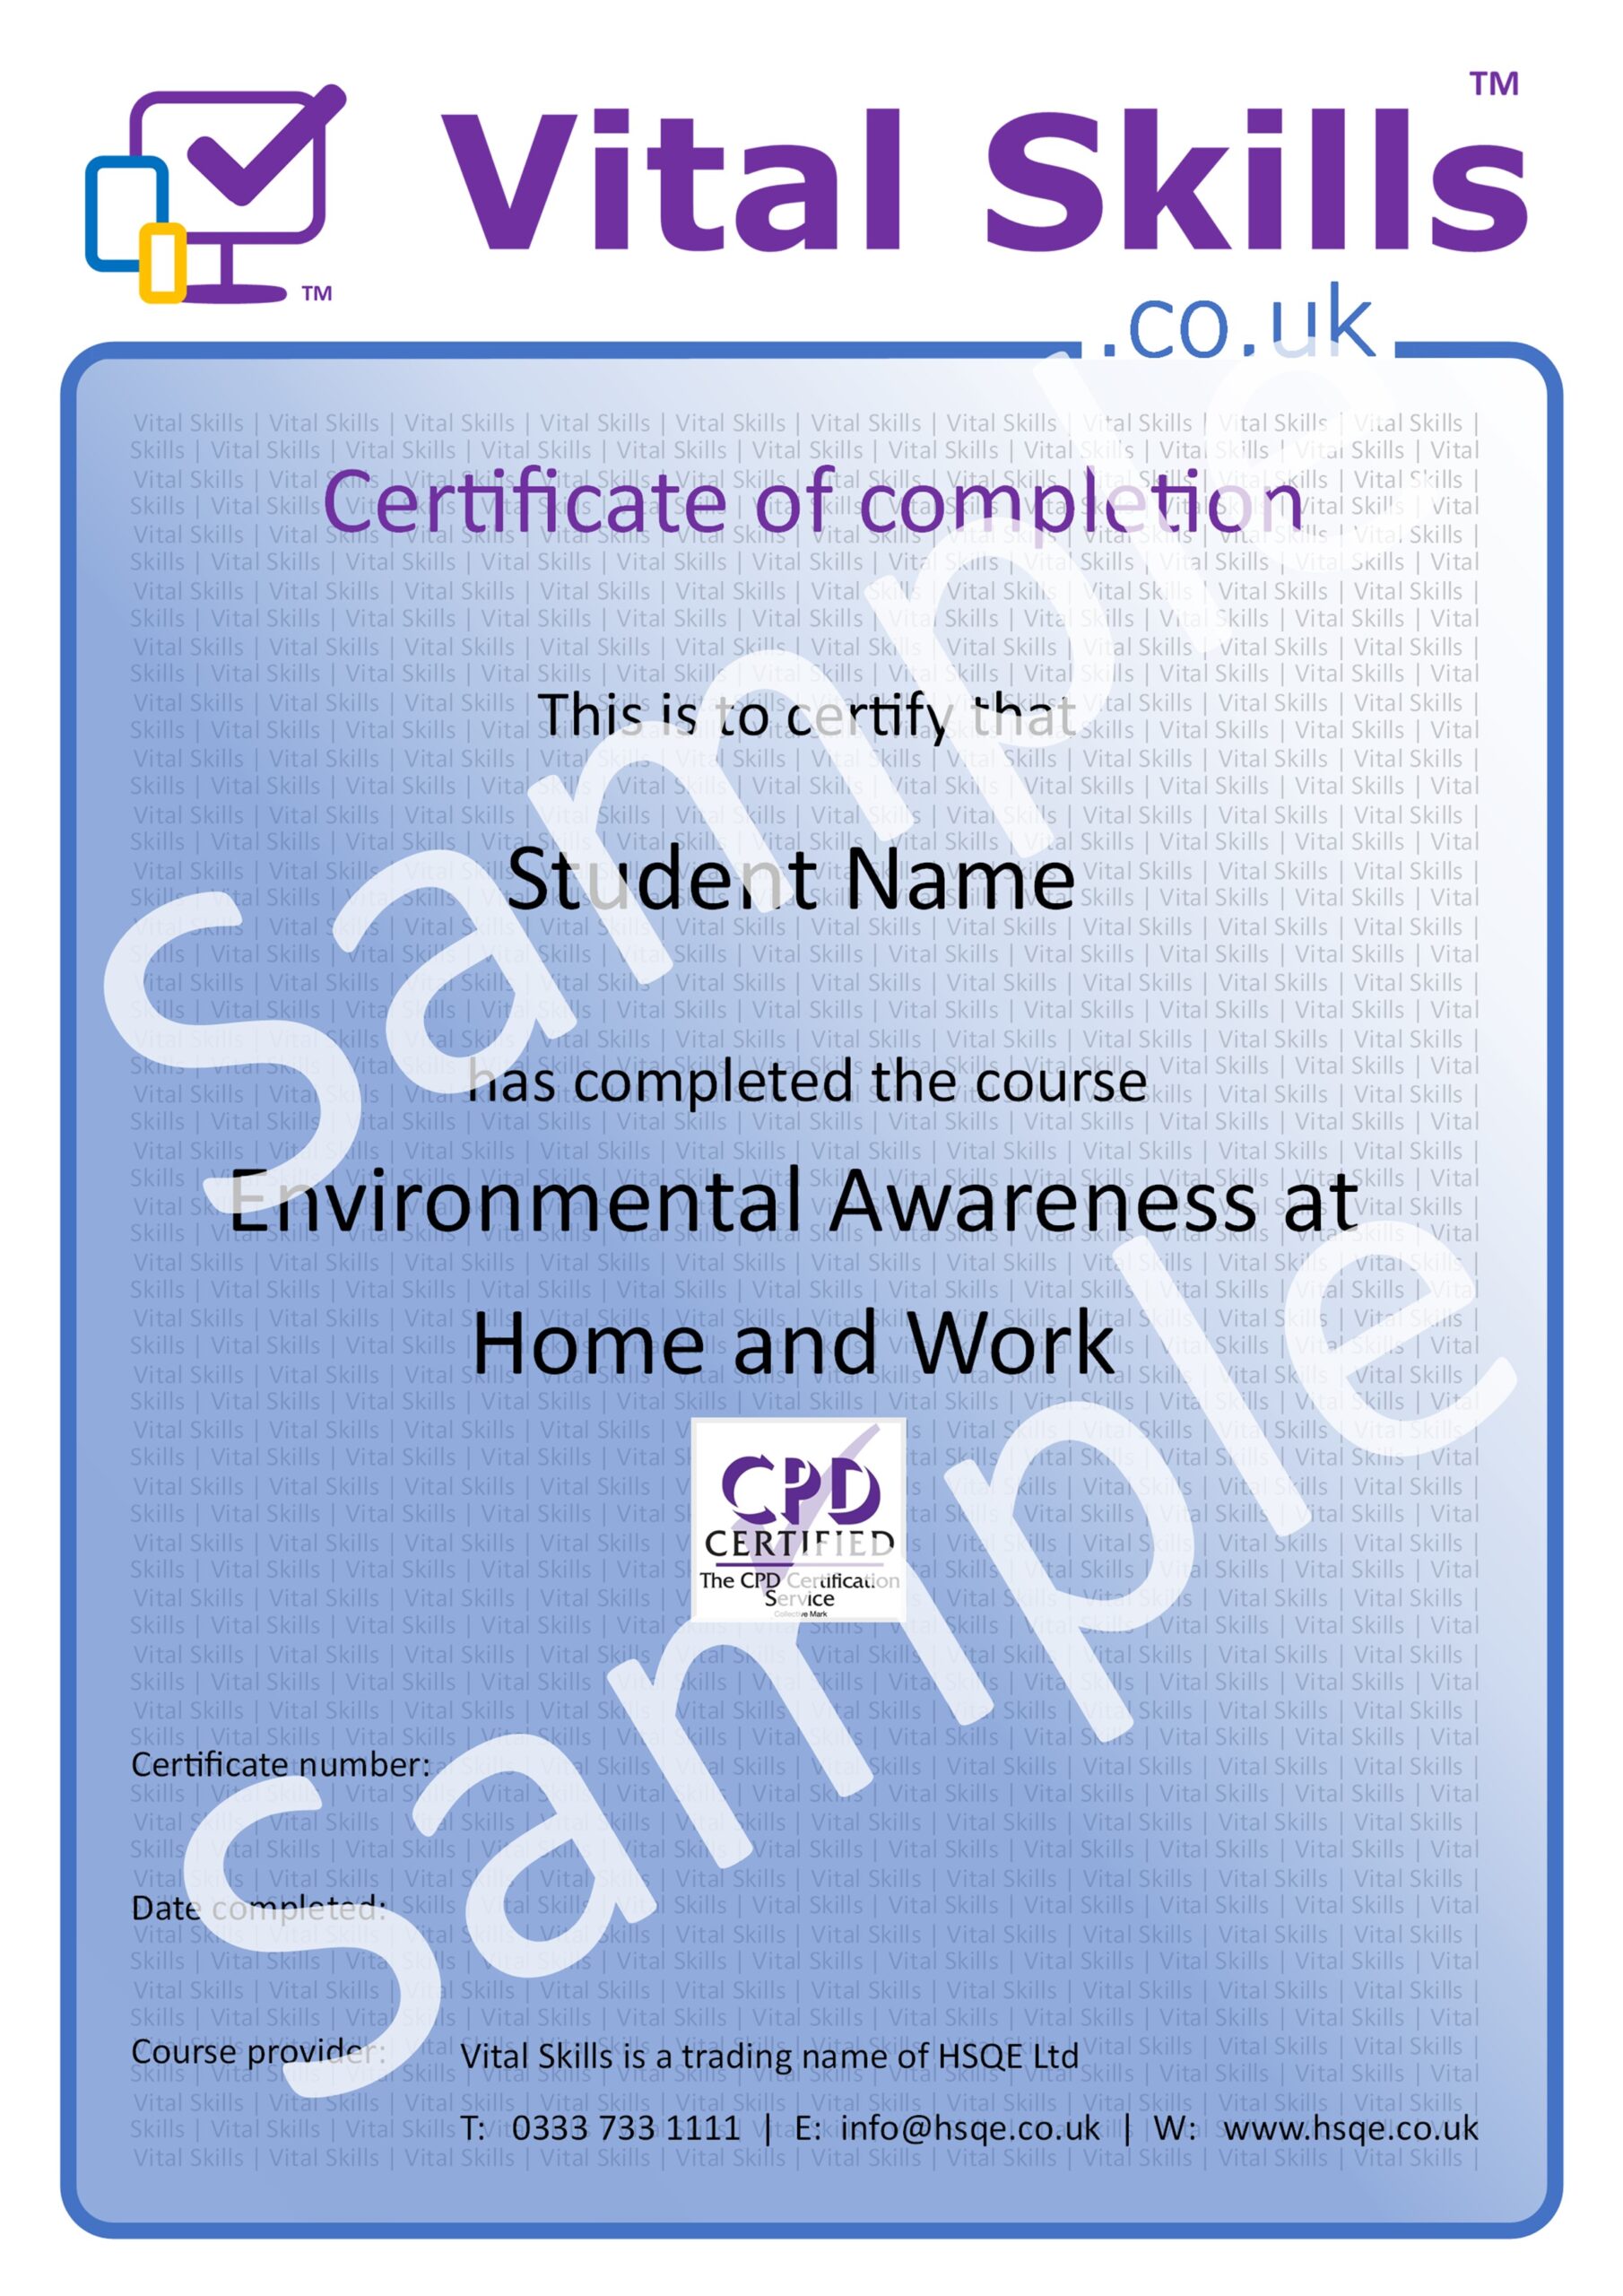 Environmental Awareness at Home and Work Online Training Course Certificate HSQE Vital Skills